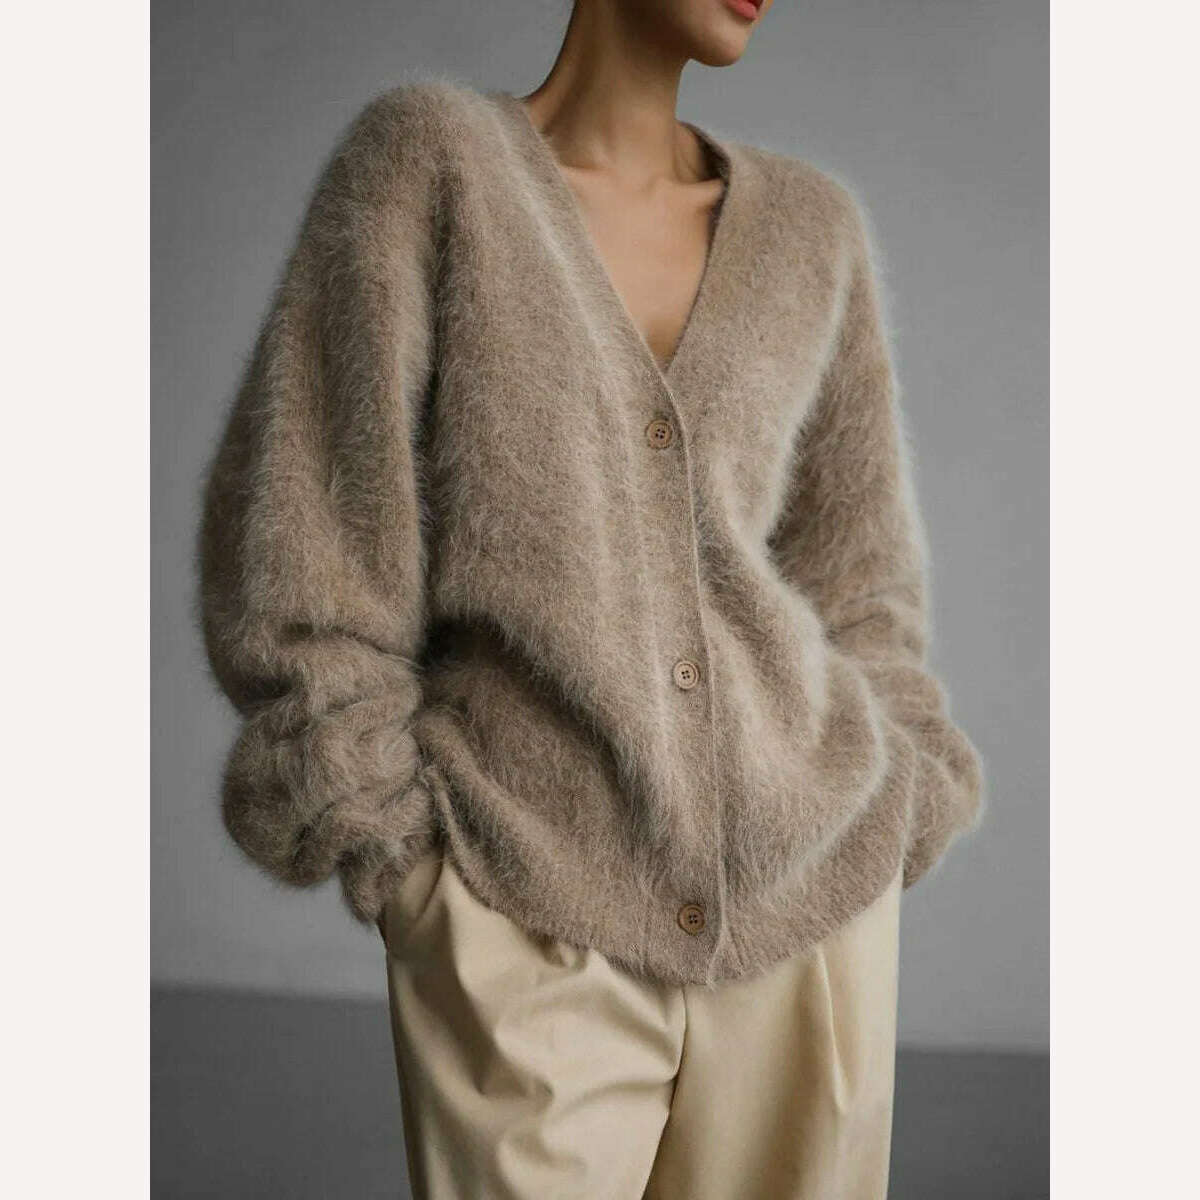 KIMLUD, Fluffy Mohair Cardigan For Women V-Neck Button Up Oversize Cardigan Sweater Autumn Winter Warm Knitted Outerwear, Khaki / S, KIMLUD Womens Clothes